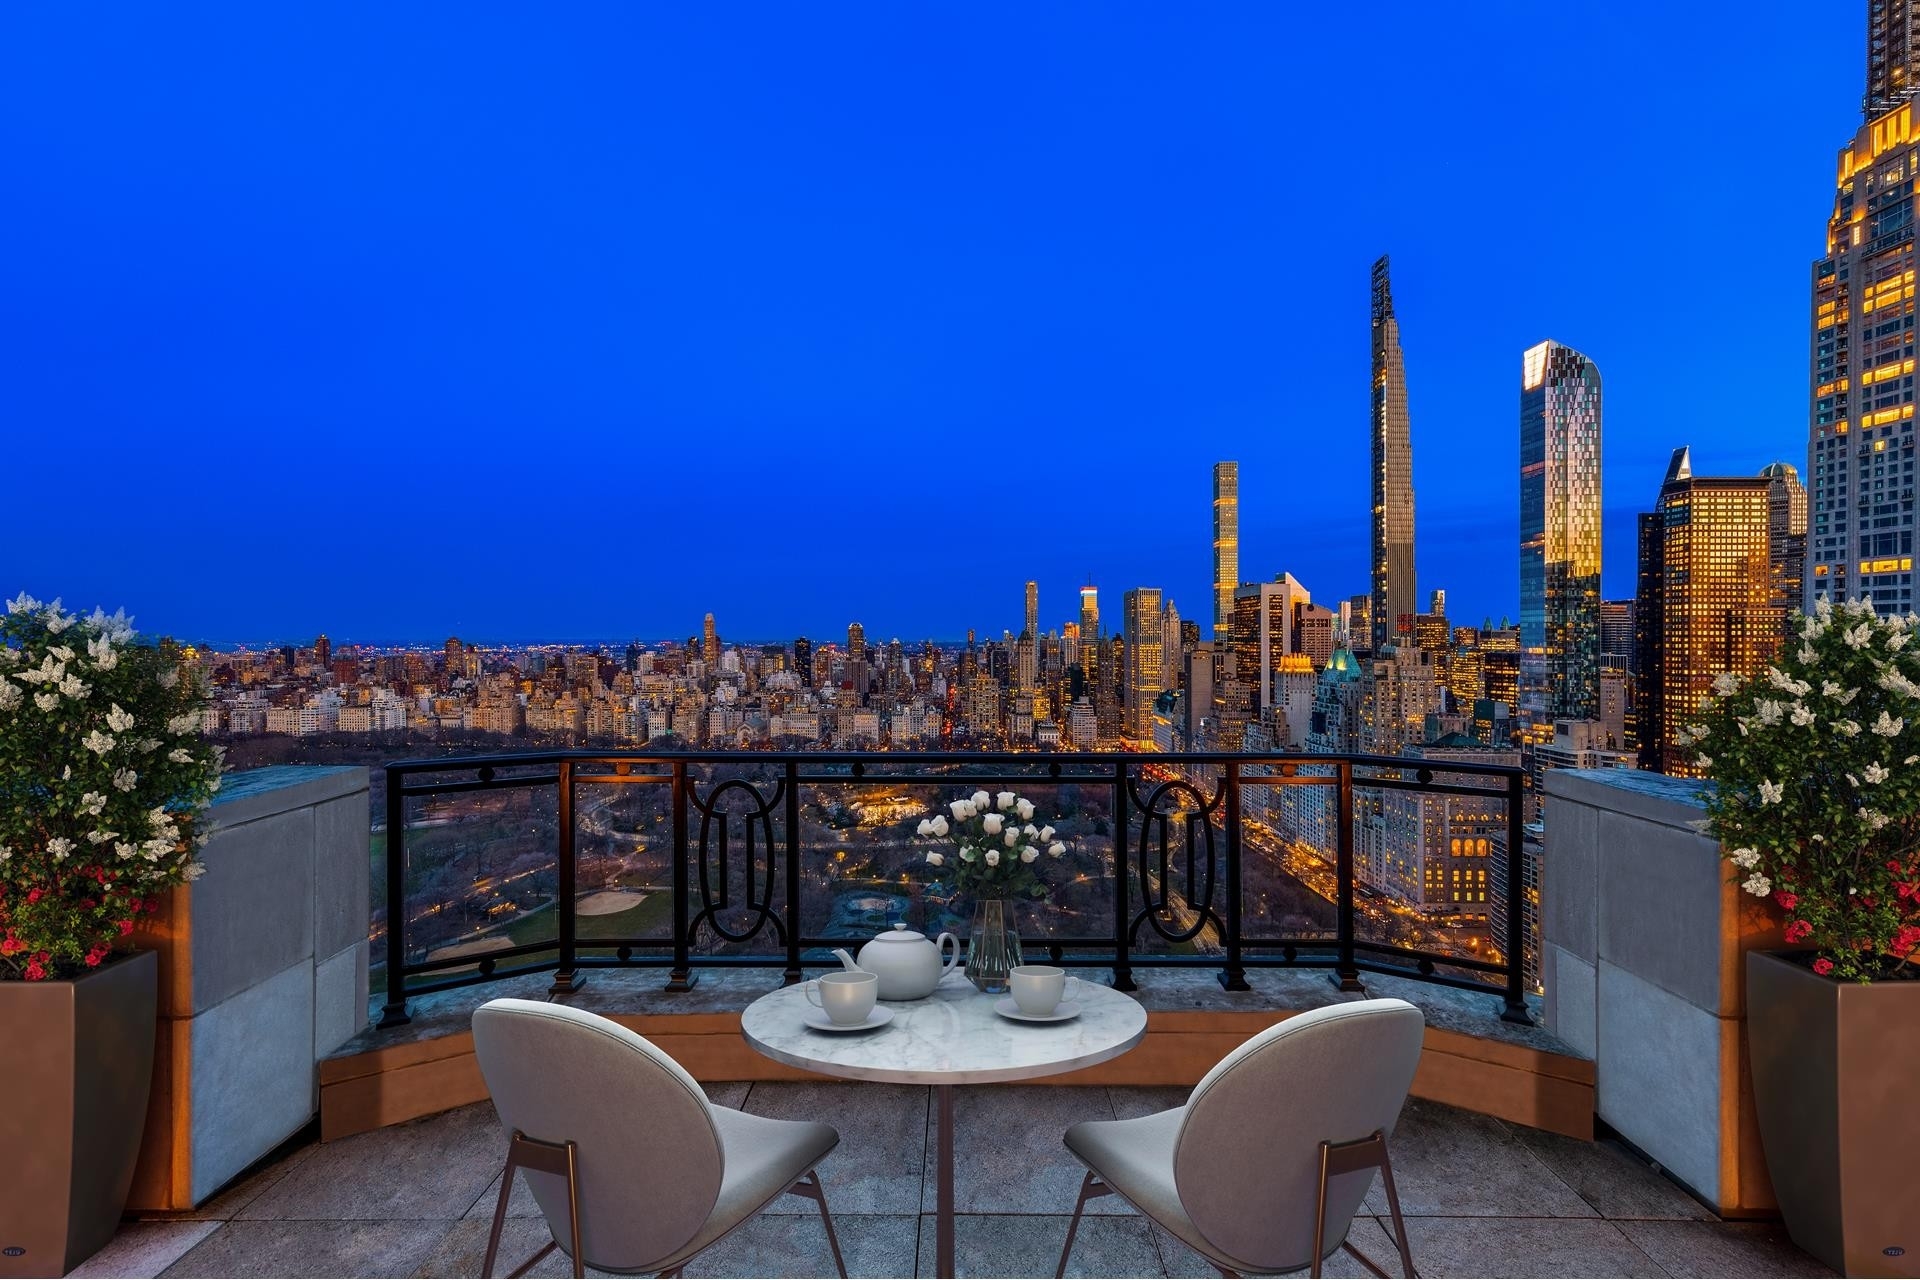 Condominium for Sale at 15 Cpw, 15 CENTRAL PARK W, PH41 Lincoln Square, New York, NY 10023